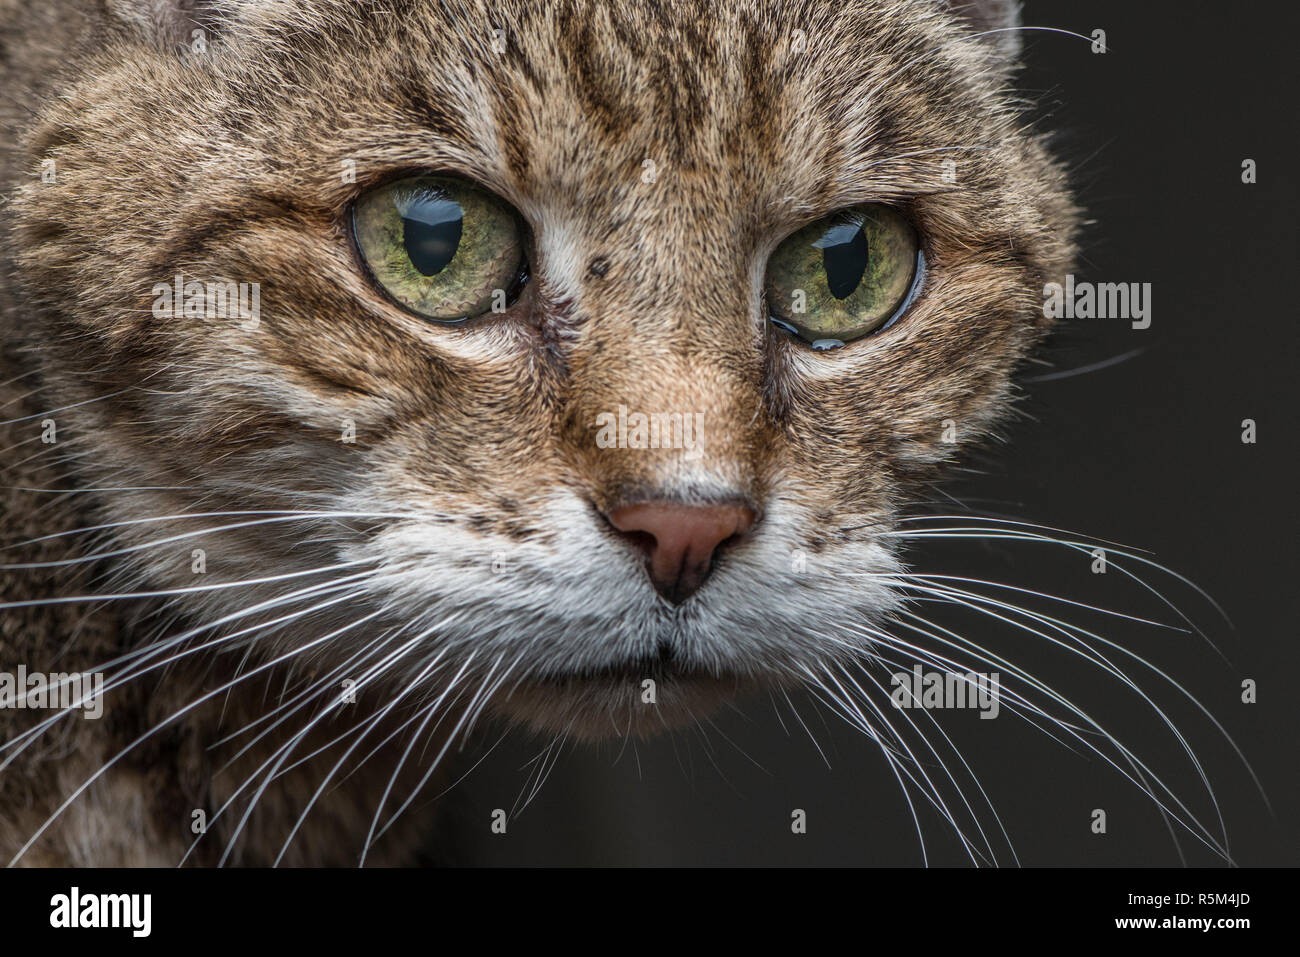 A close up photo of a ten year old foster cat's face and eyes showing the details in both. Stock Photo